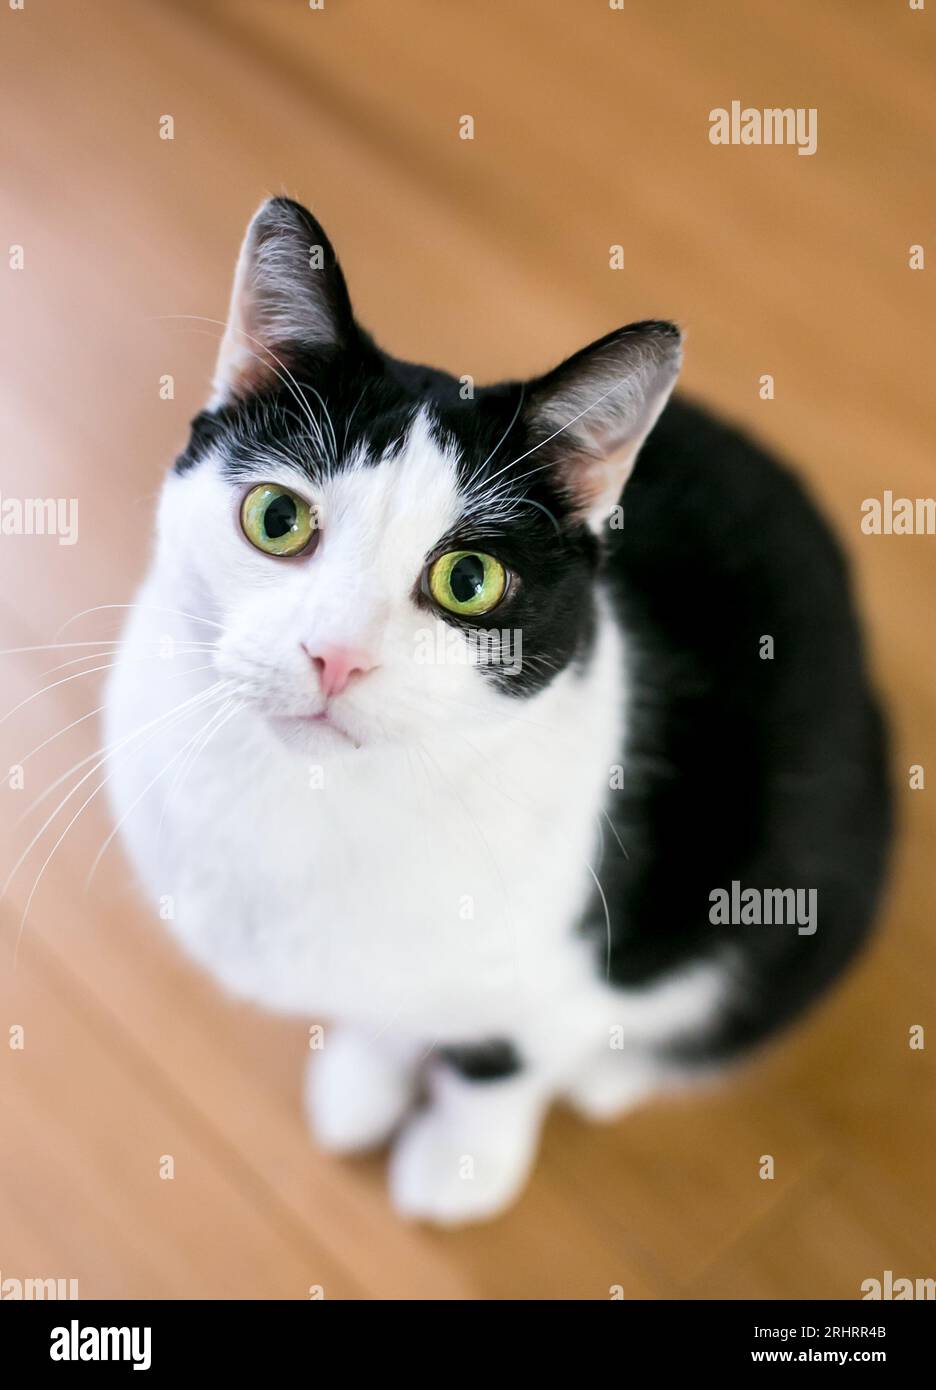 A black and white shorthair cat with green eyes sitting and looking up at the camera Stock Photo